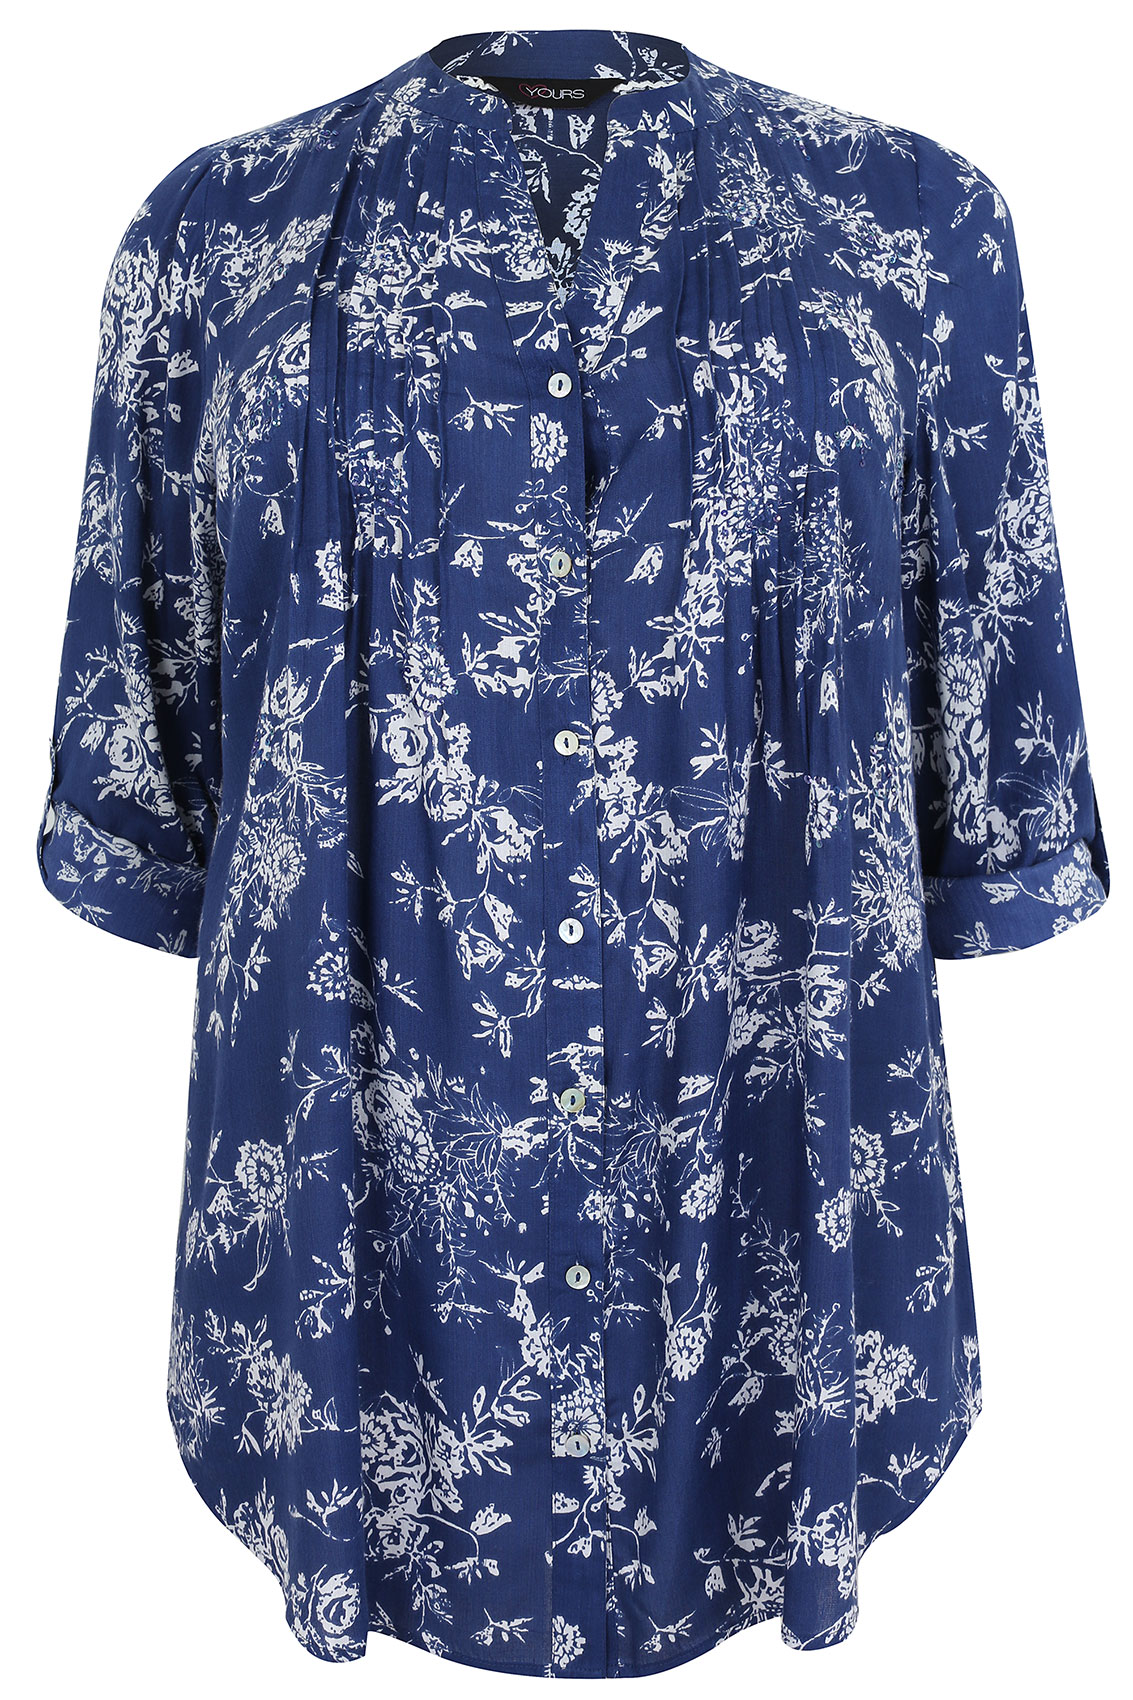 Blue & White Floral Print Pintuck Blouse Plus Size 16 to 32